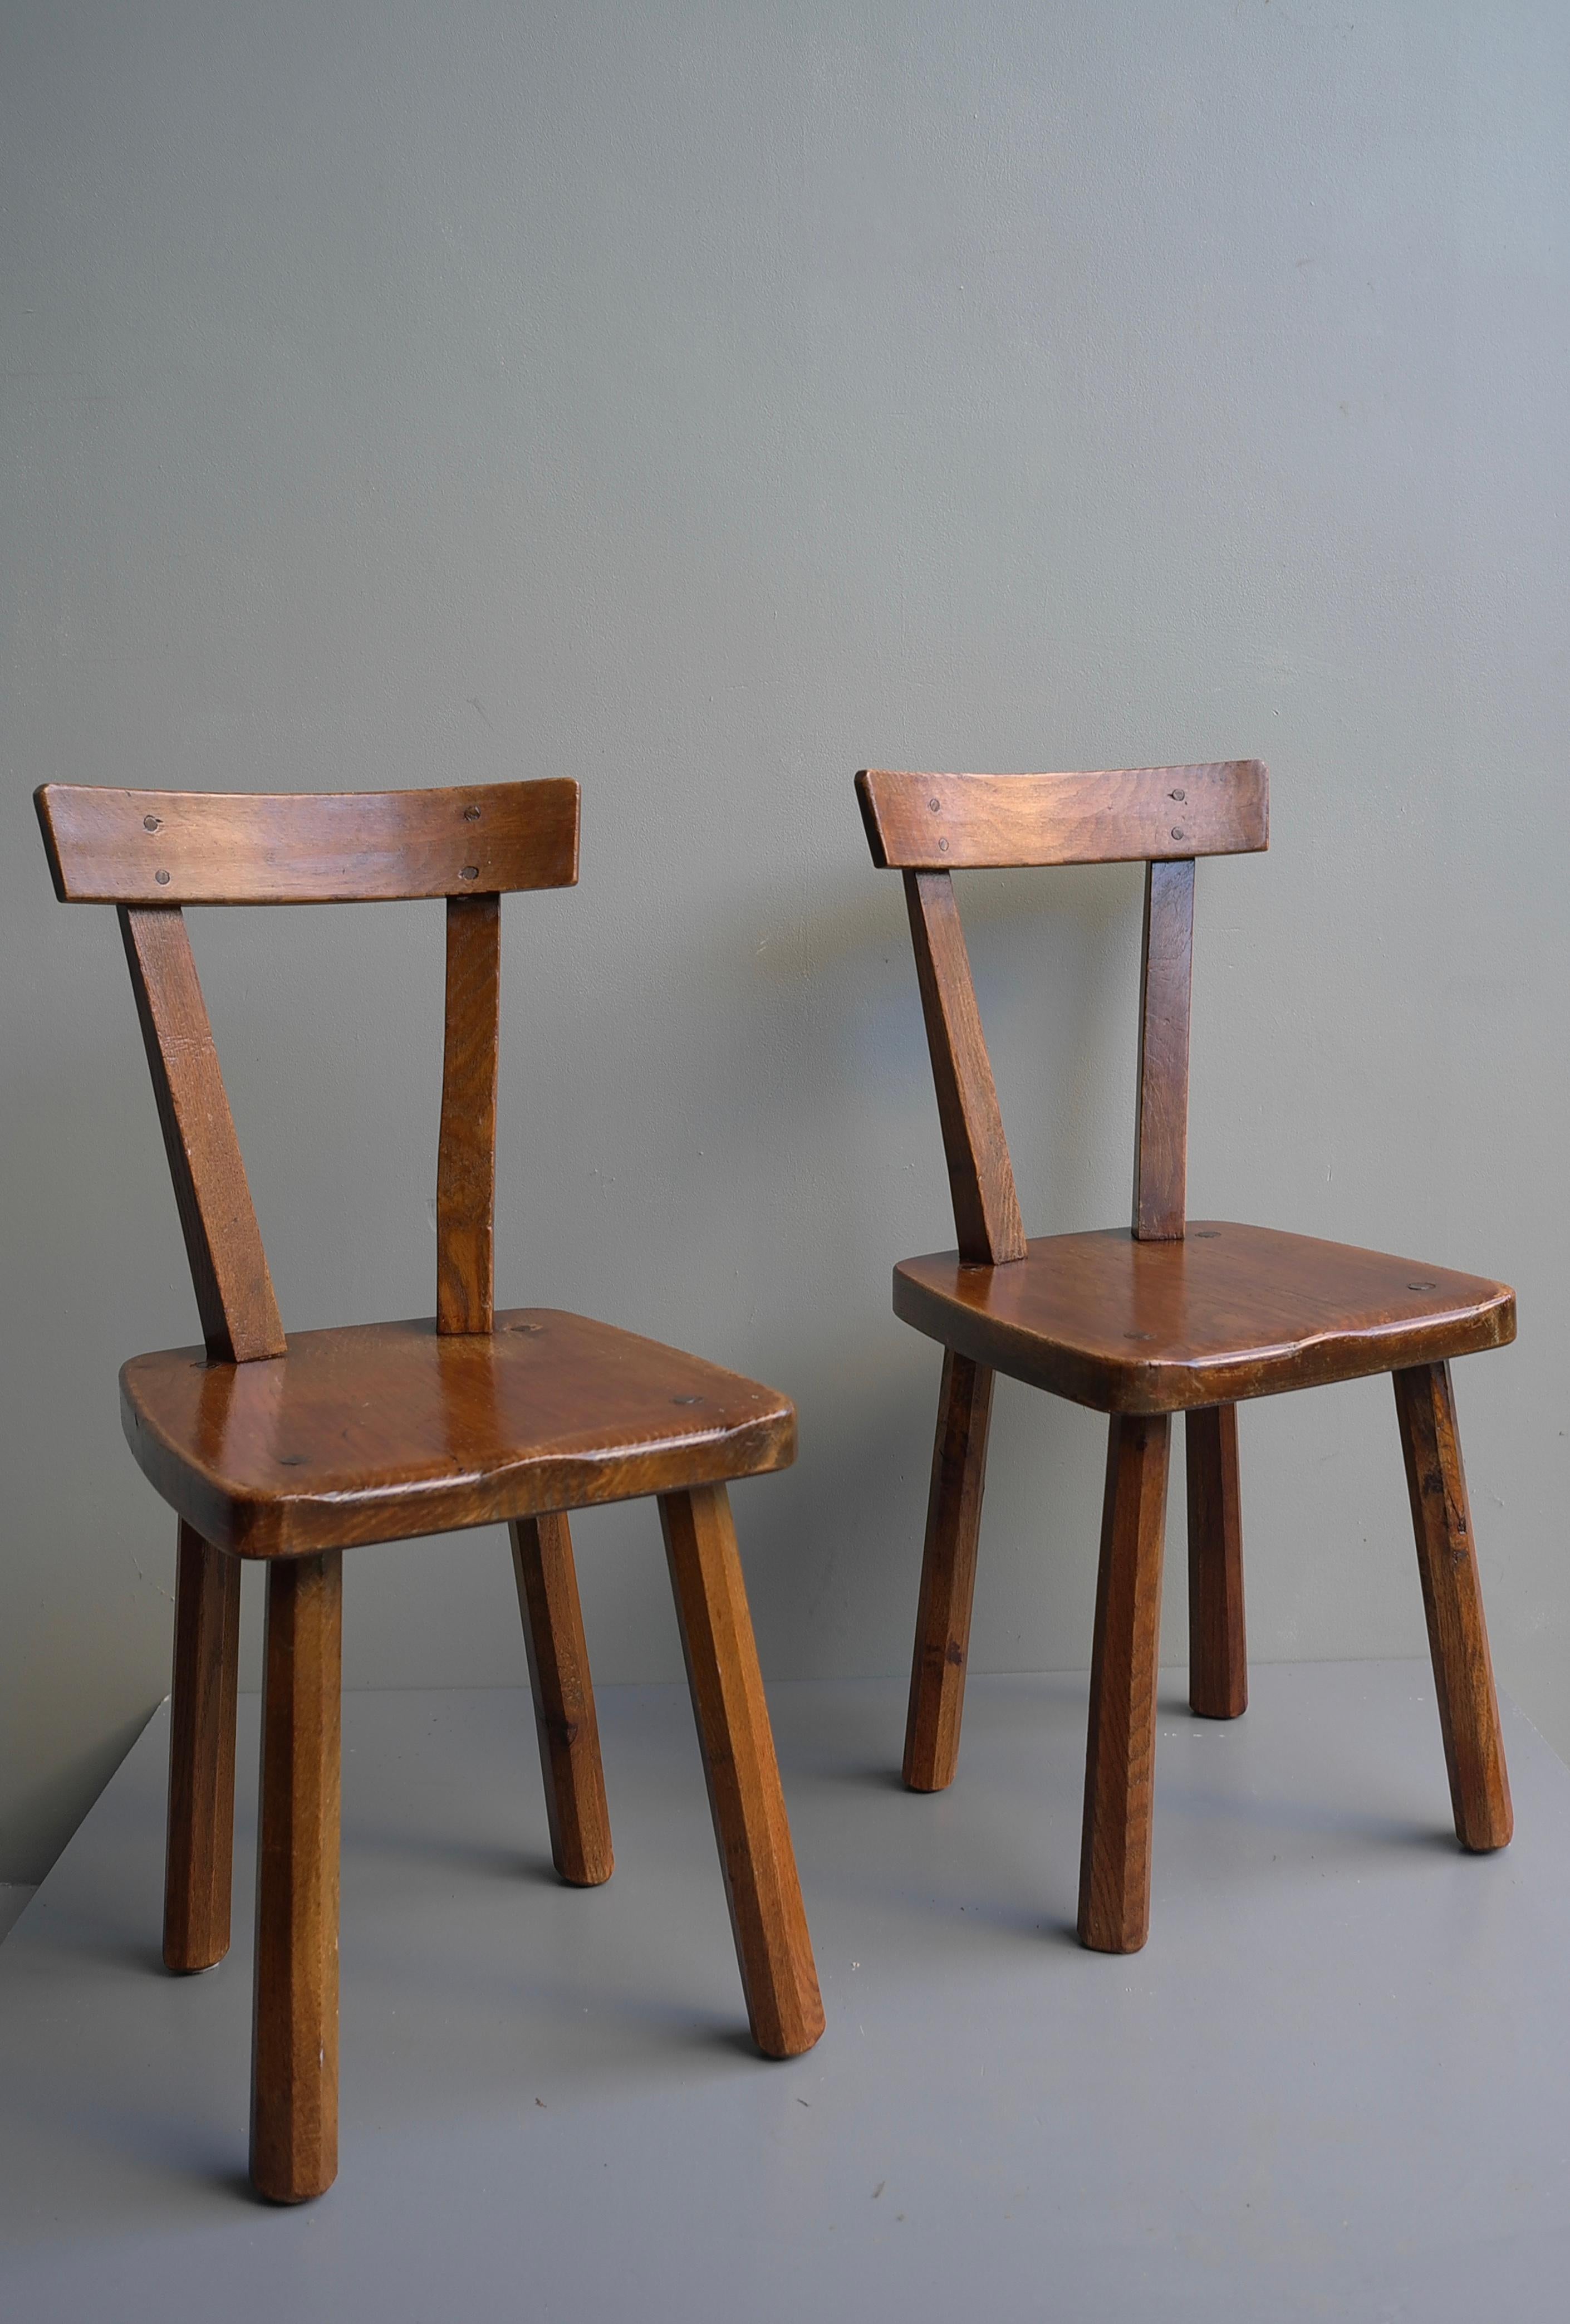 Pair of oak chairs in style of Axel Einar Hjorth, Sweden 1950's.